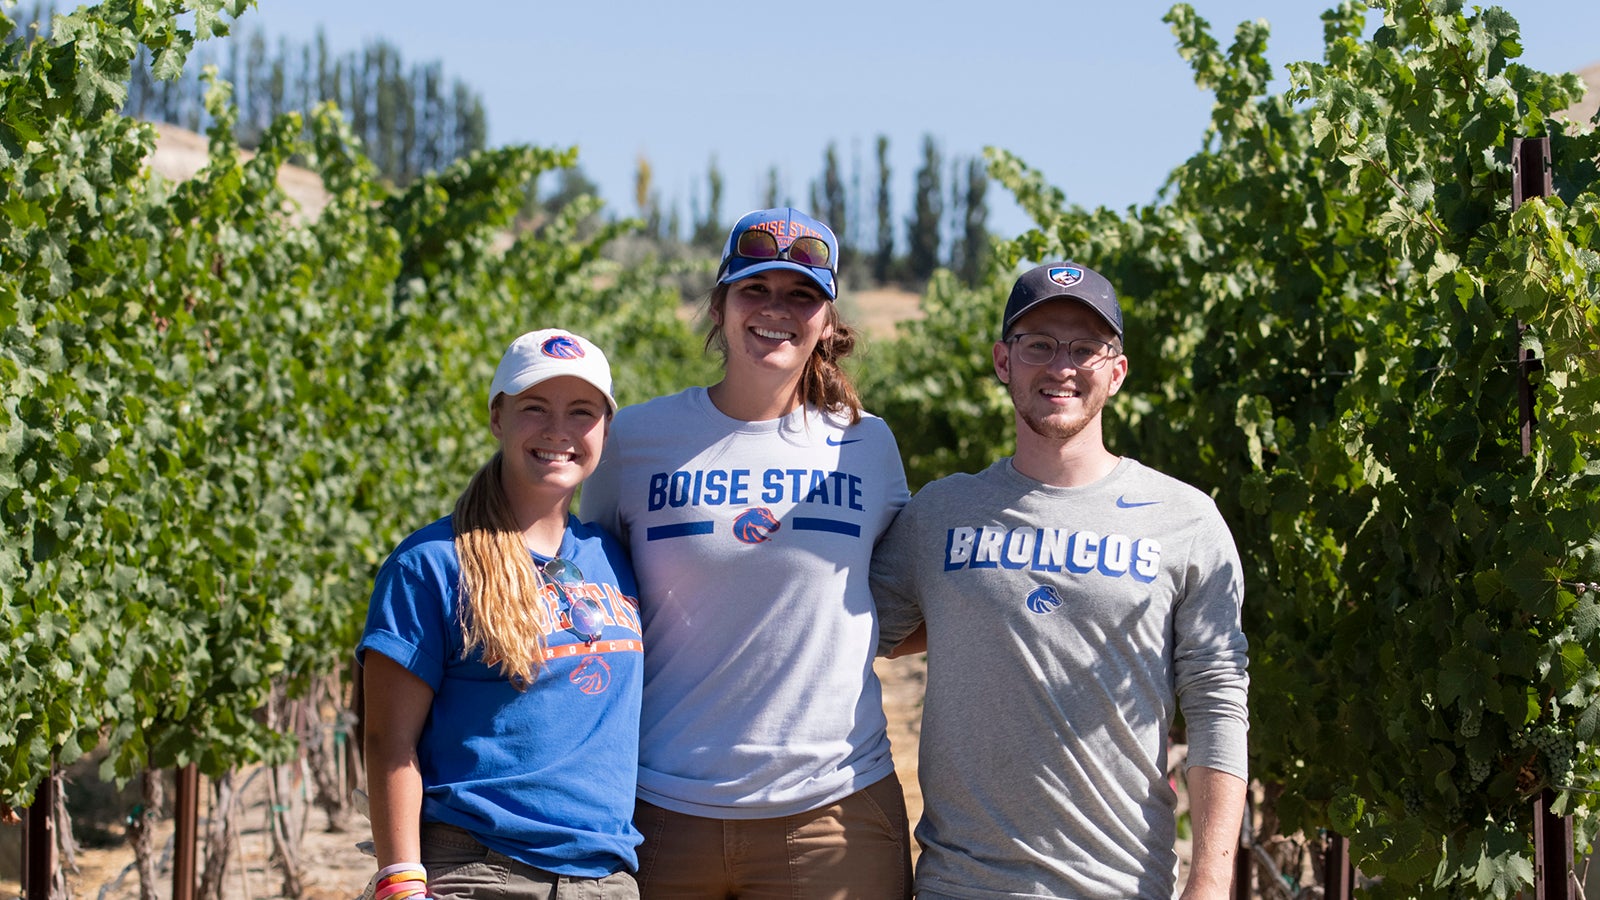 Three students stand side by side in vineyard